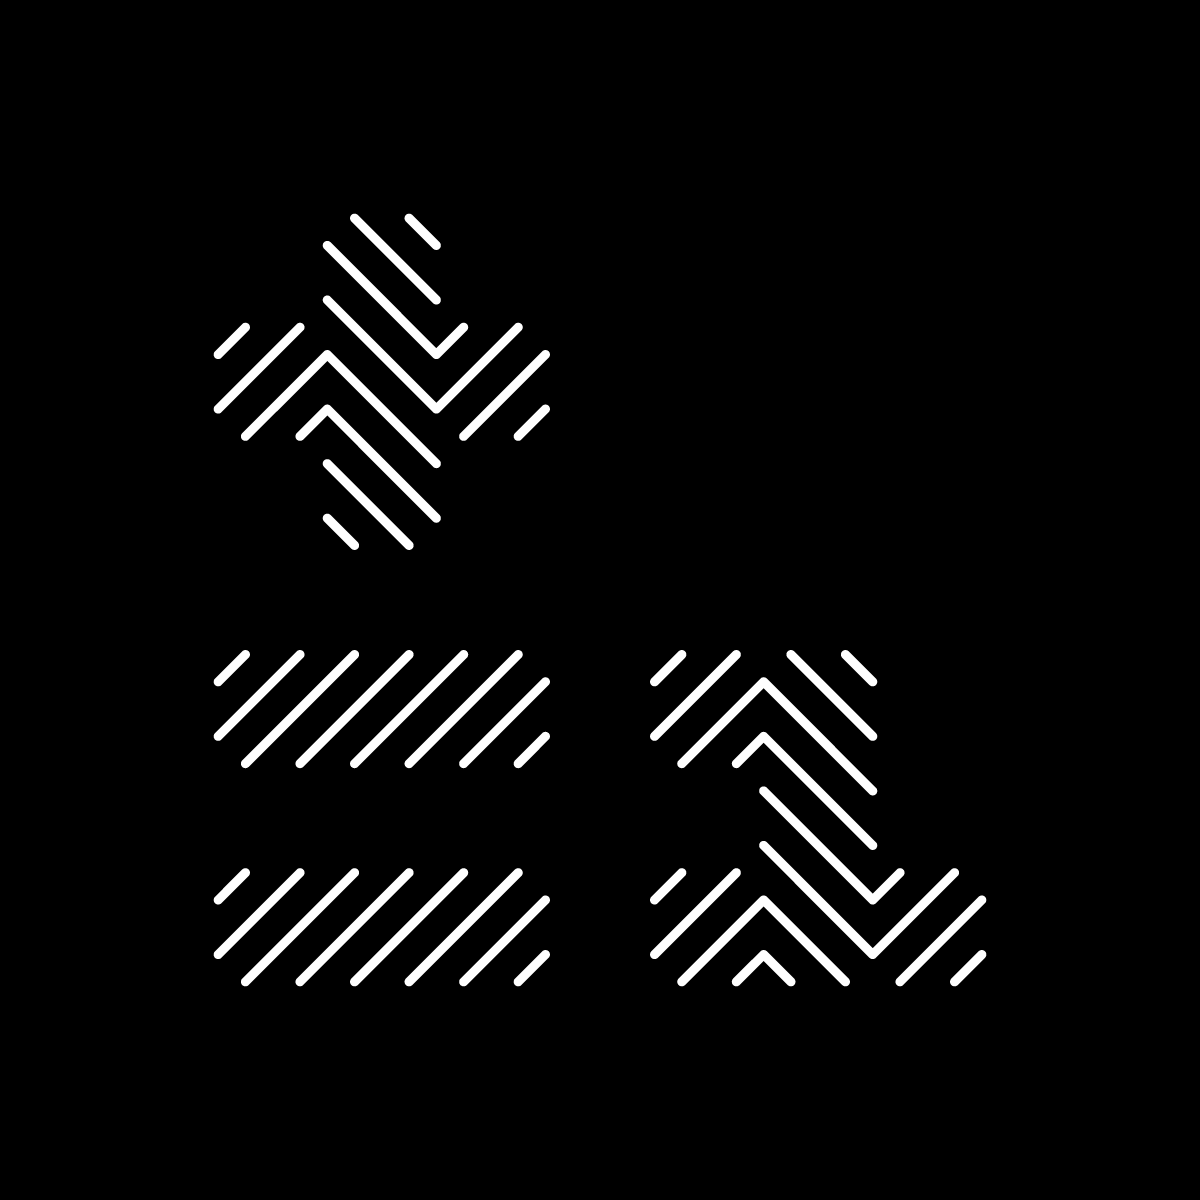 Text reading “+ = 1”, stylized in a pattern of diagonal lines